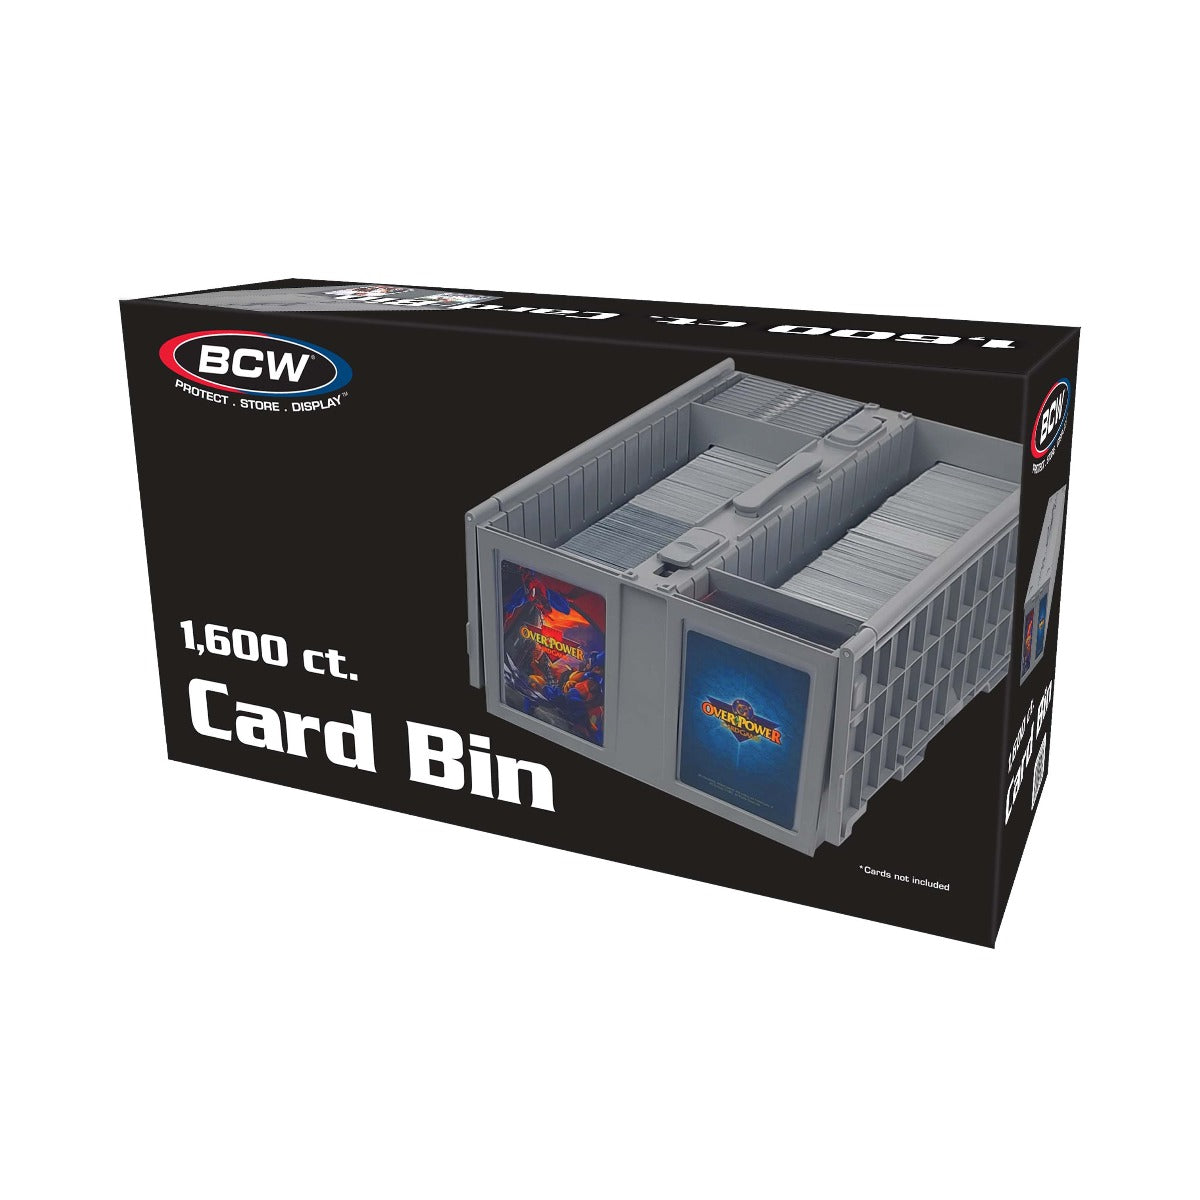 Card Storage Box in gray color fits 1600 sports cards - Packaging in cardboard box with BCW logo on box (1-ccb-1600-g-gry)